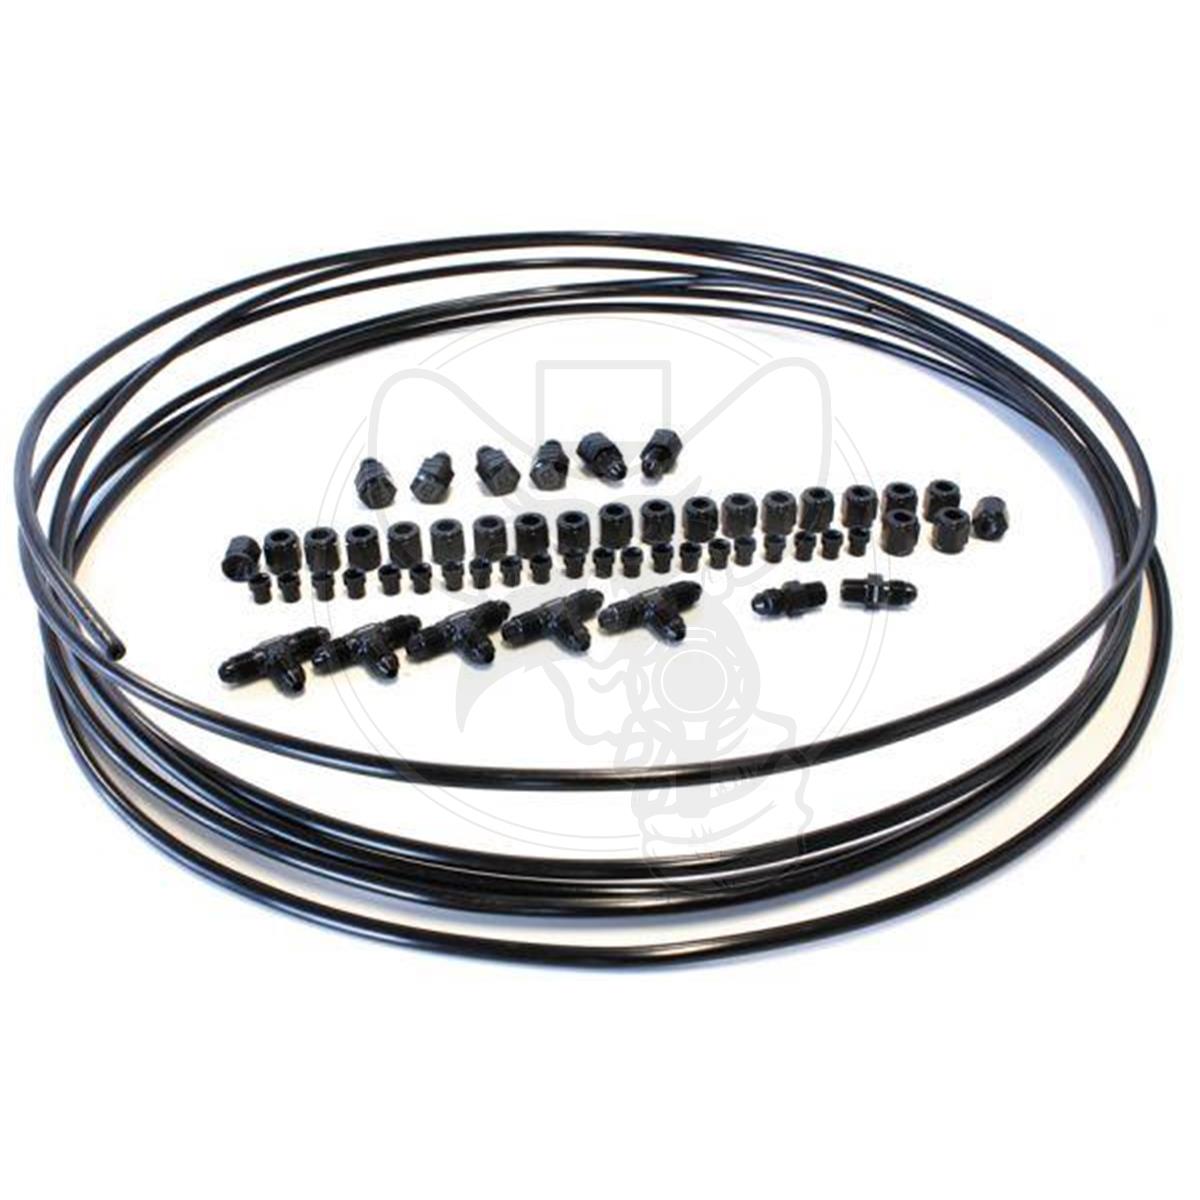 AEROFLOW FIRE SYSTEM LINE KIT 25'/7.5M INCLUDES A RANGE OF FITTINGS